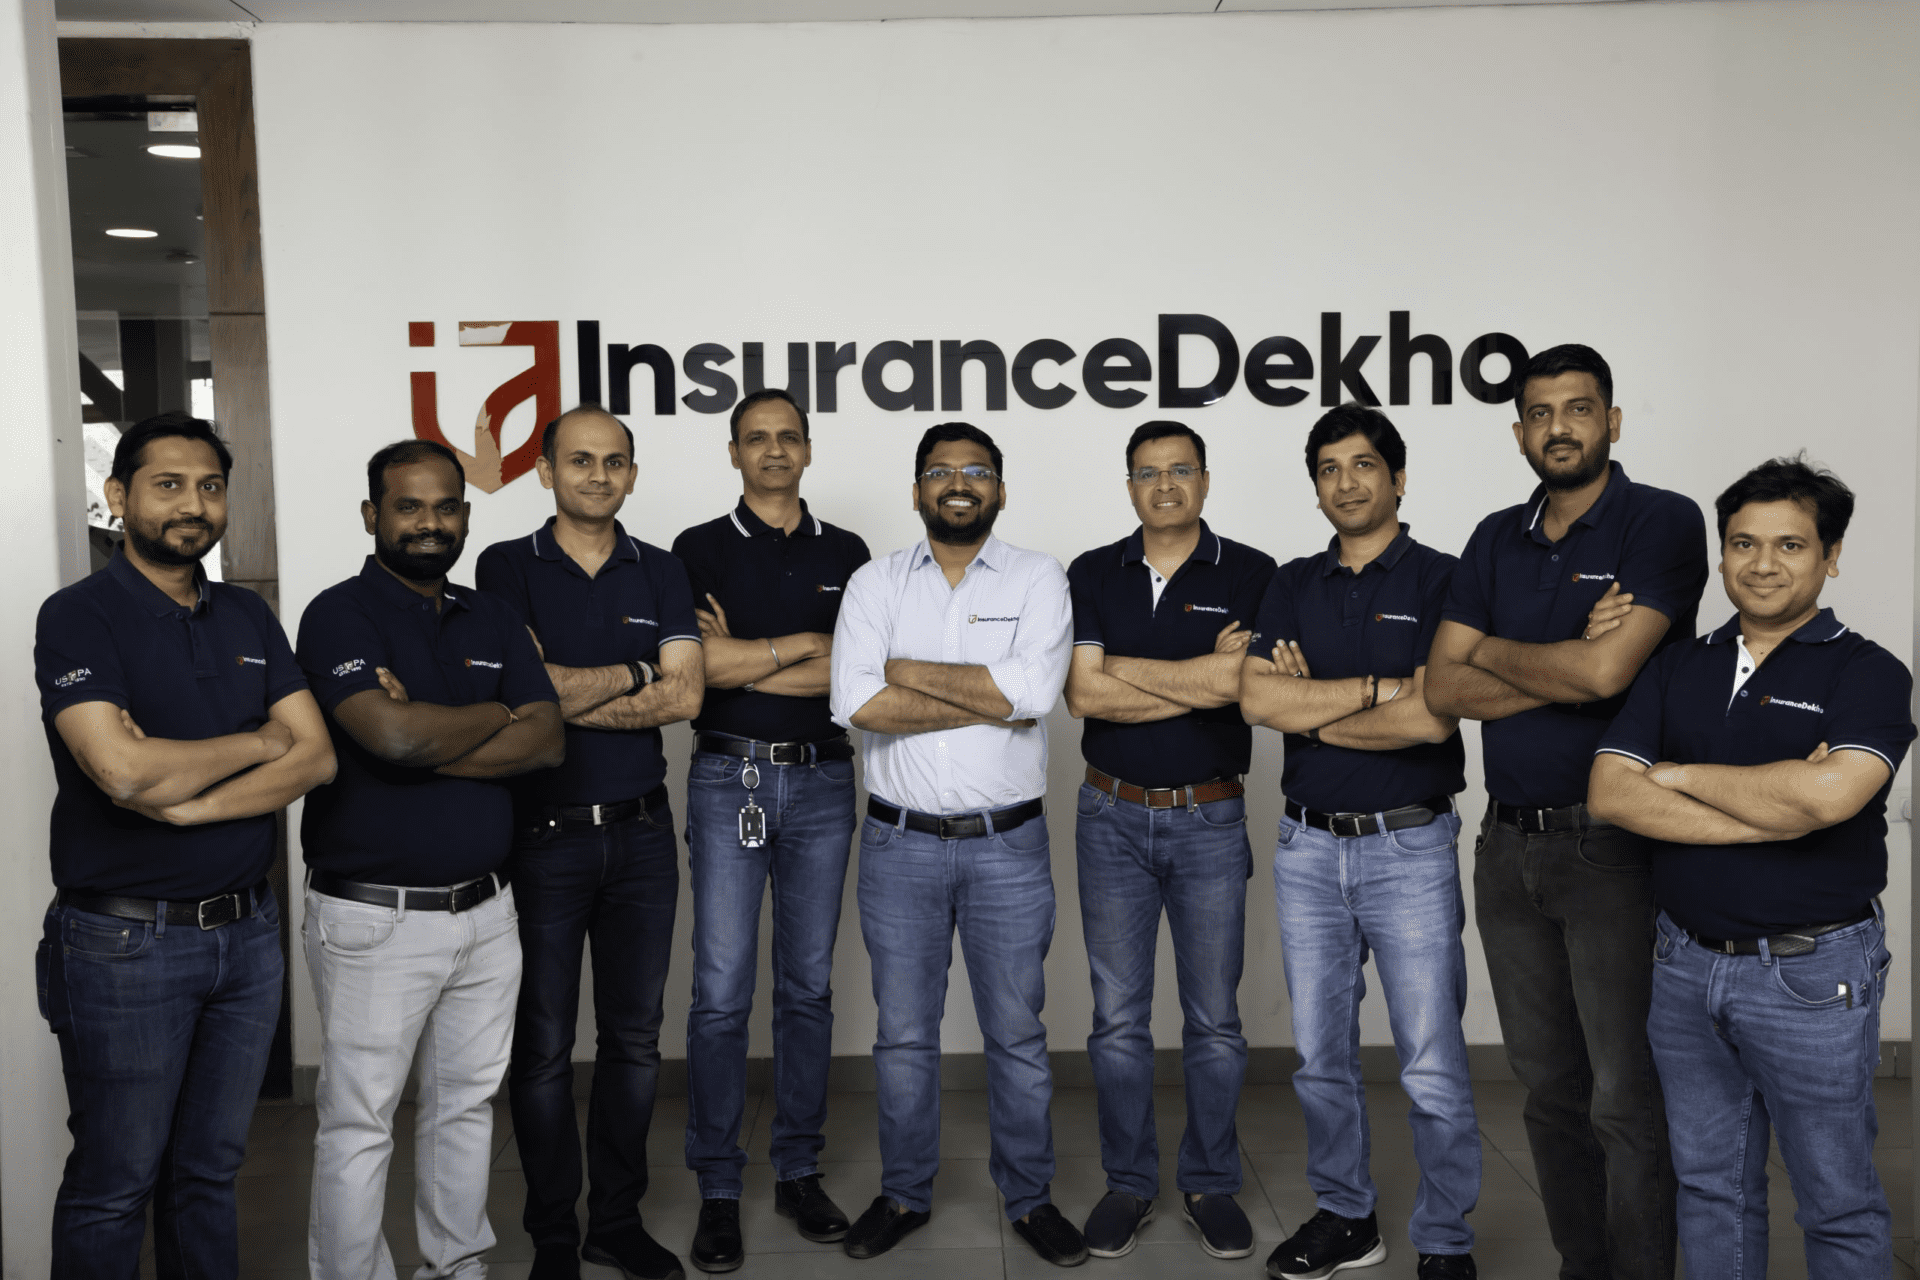 InsuranceDekho raised $150 million a mix of equity and debt in Series A